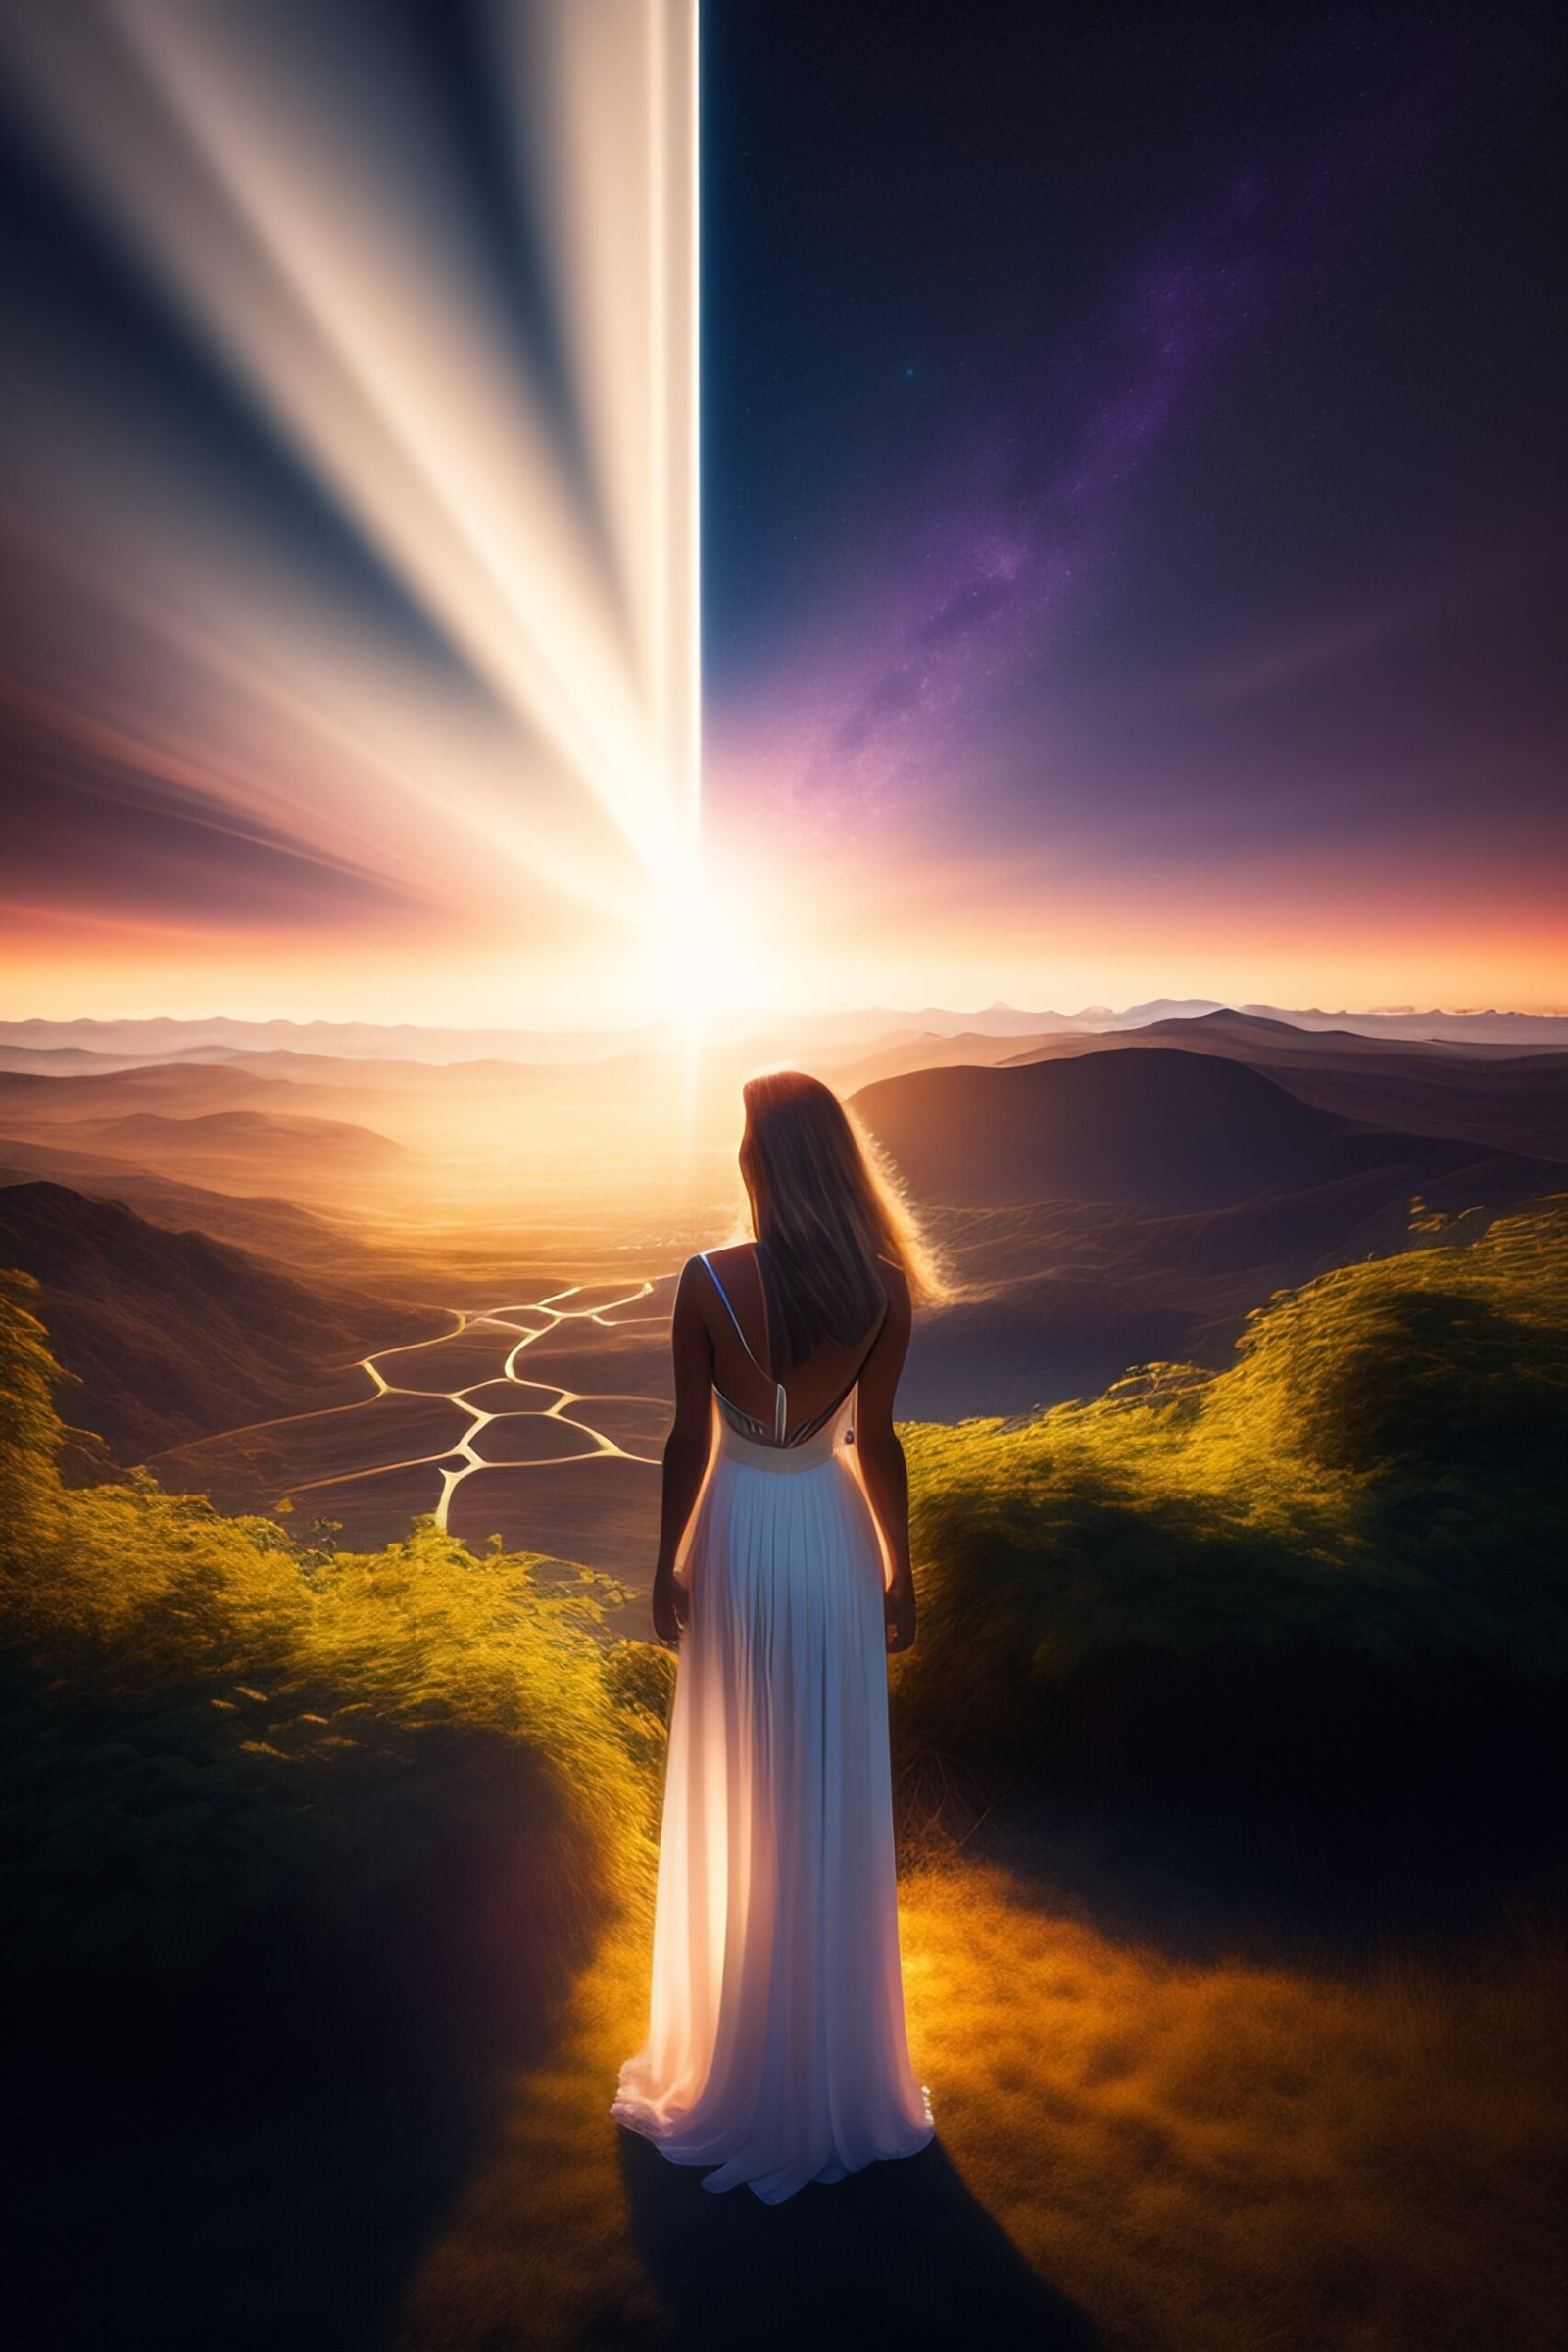 A goddess in long white dress stands on the edge of the house, and looks into the space sky through which a ray of light breaks through